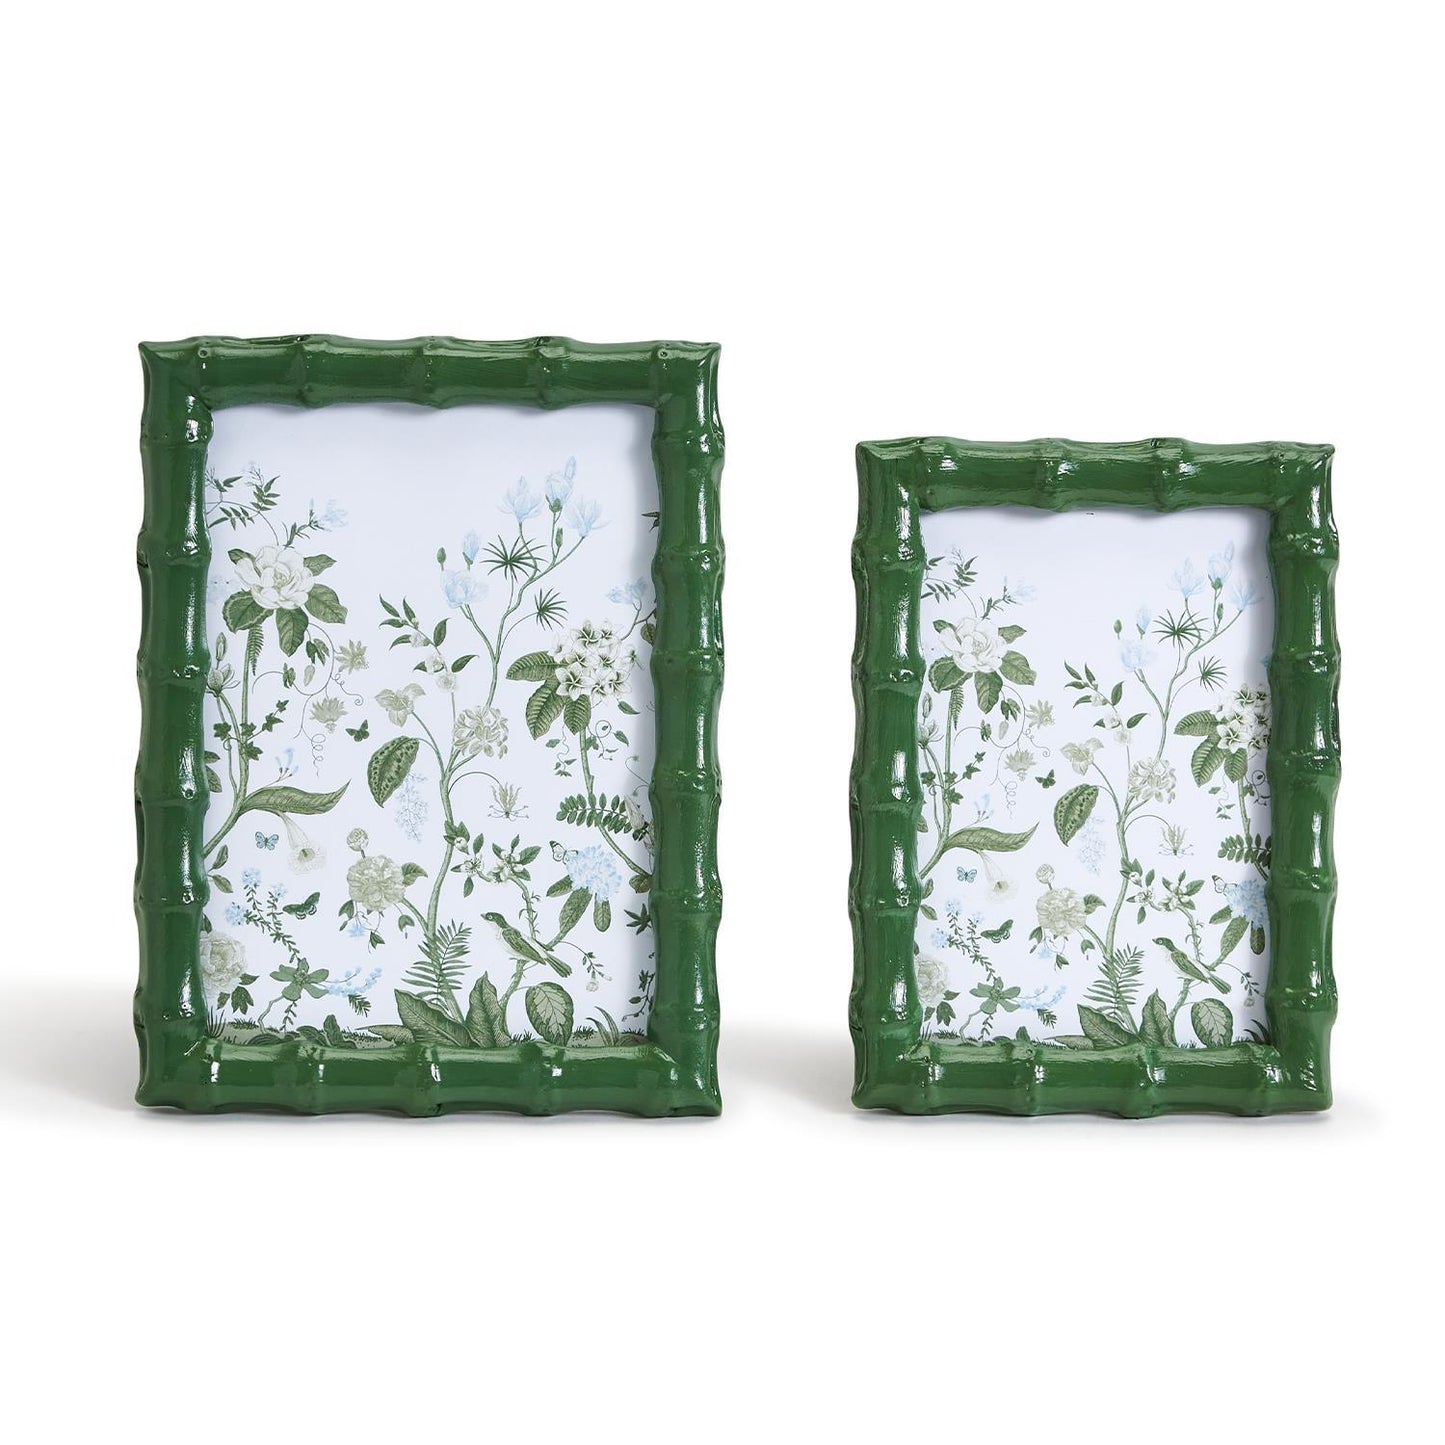 Countryside Green Frame - 4x6 Home Decor Two's Company   